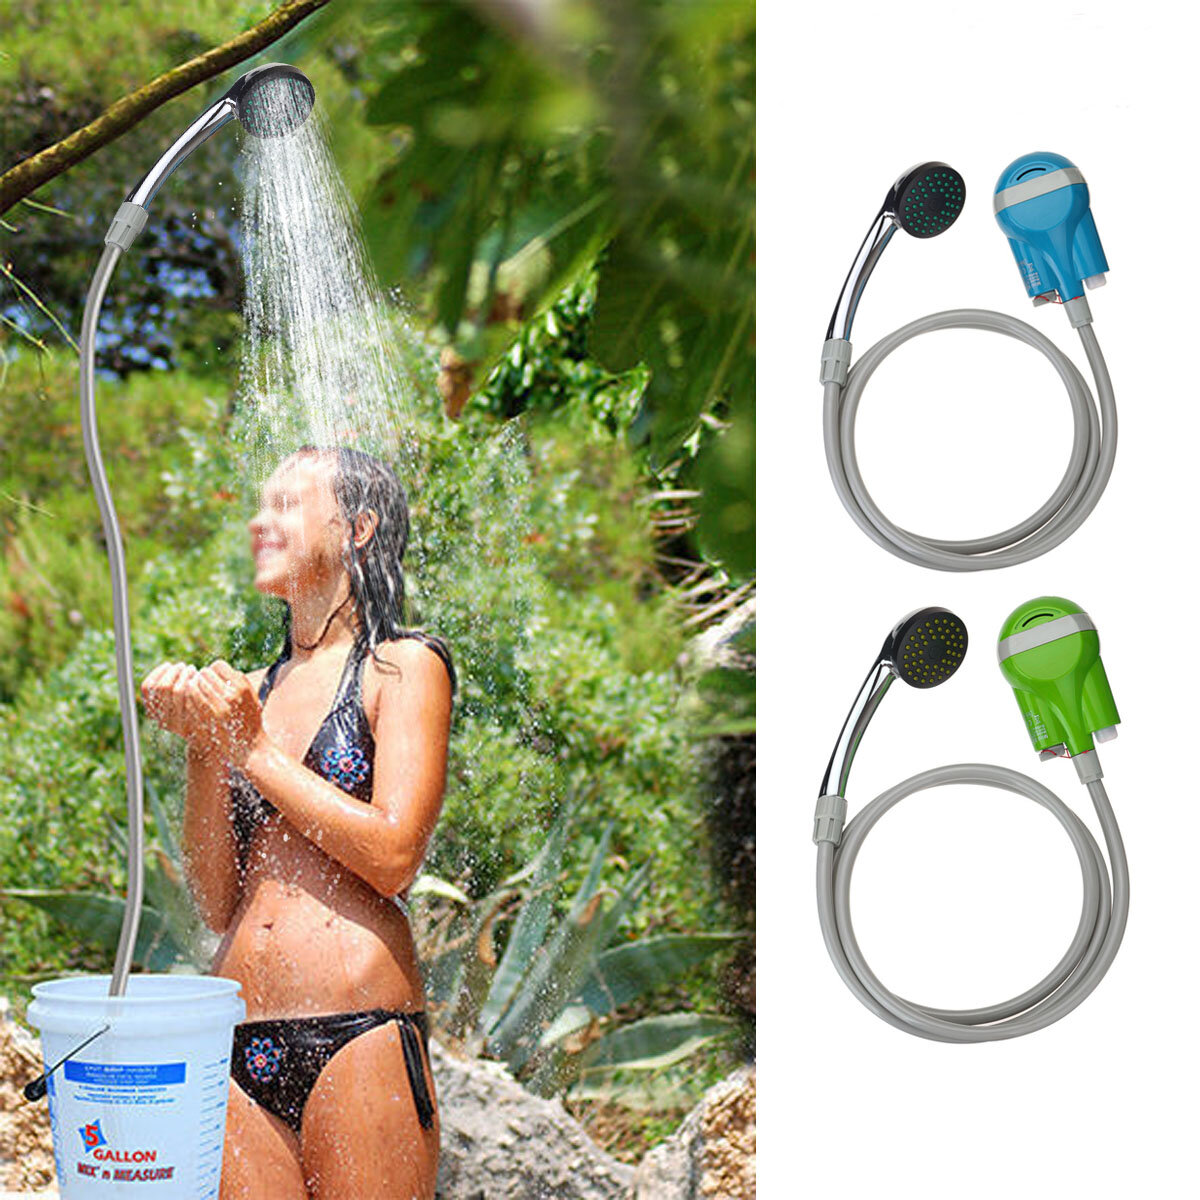 IPRee® Portable Shower Water Pump USB Rechargeable Nozzle Handheld Water Spary Shower Faucet Camping Caravan Travel Outdoor Kit